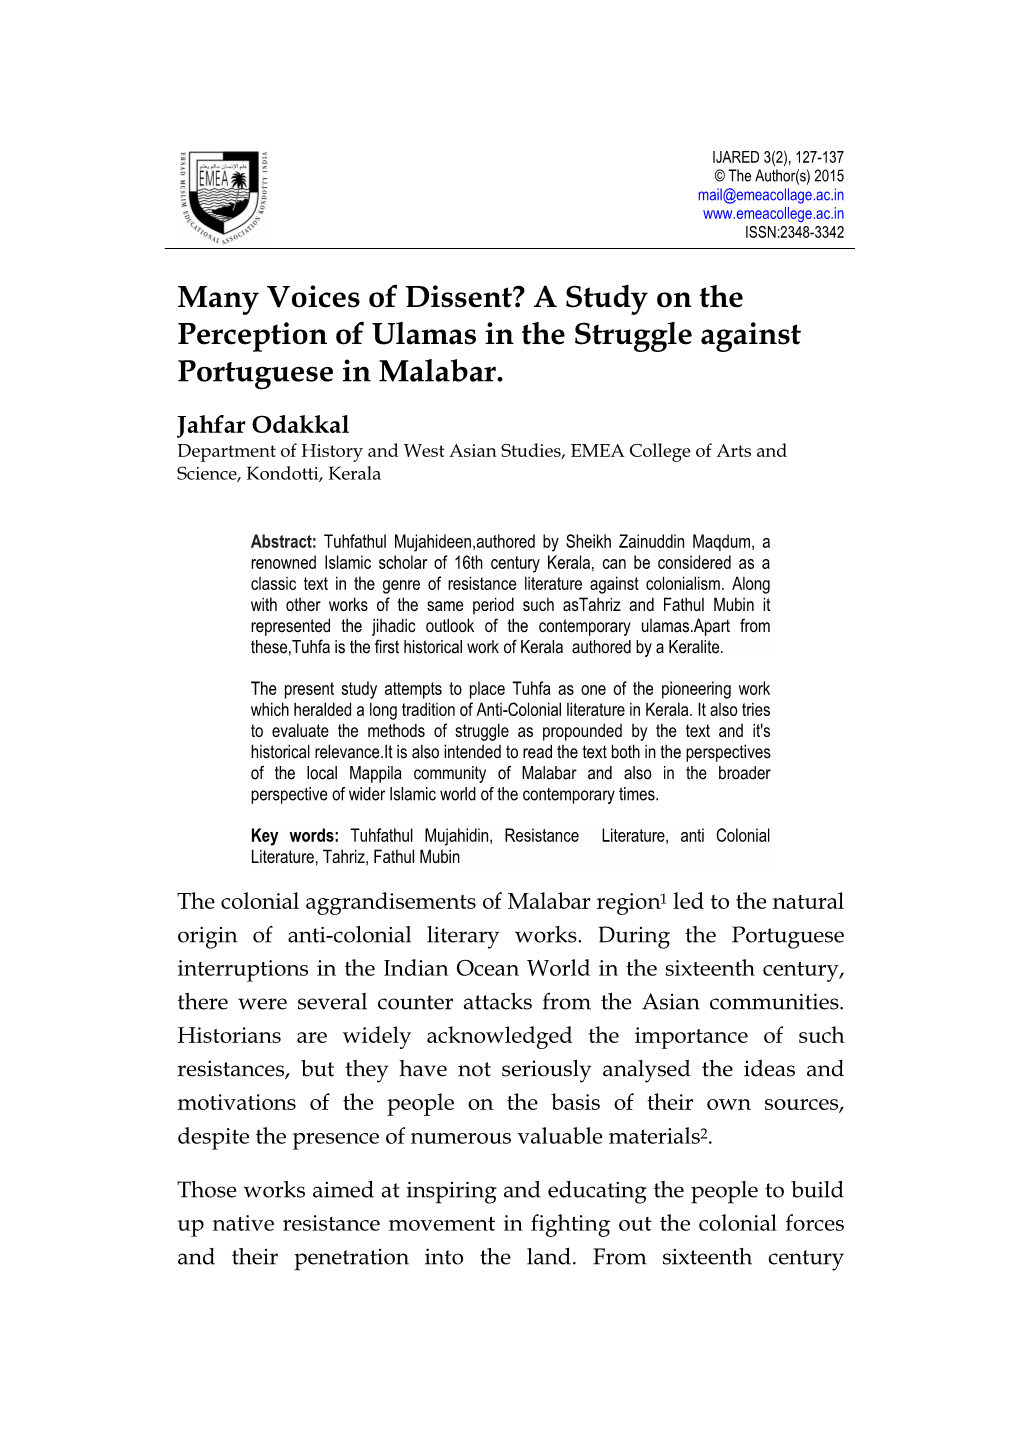 A Study on the Perception of Ulamas in the Struggle Against Portuguese in Malabar